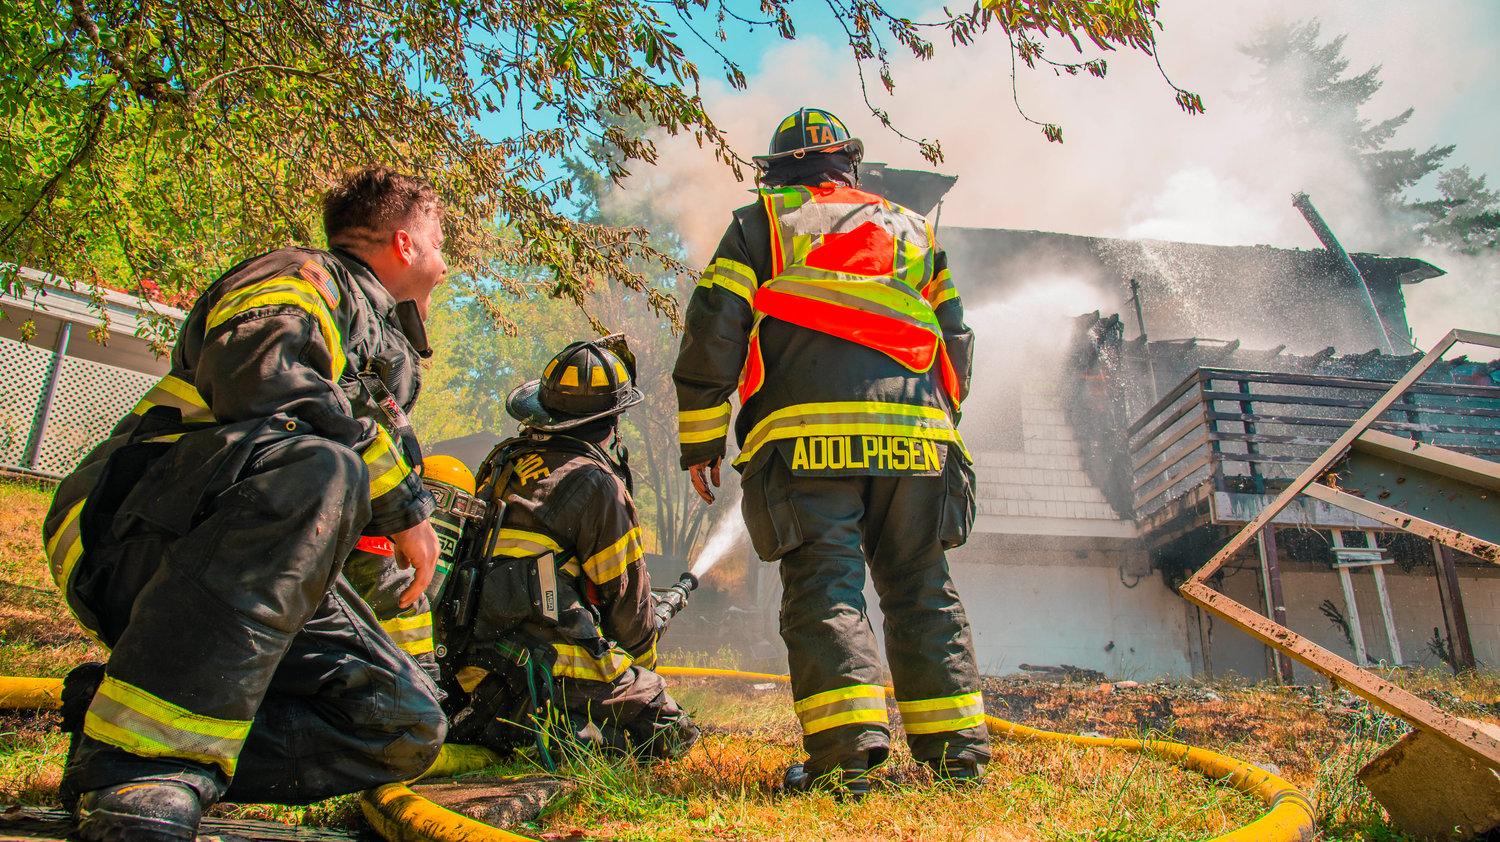 Riverside Fire Authority firefighters use a hose to put out flames at a residential structure on East Third Street in Centralia on Thursday.